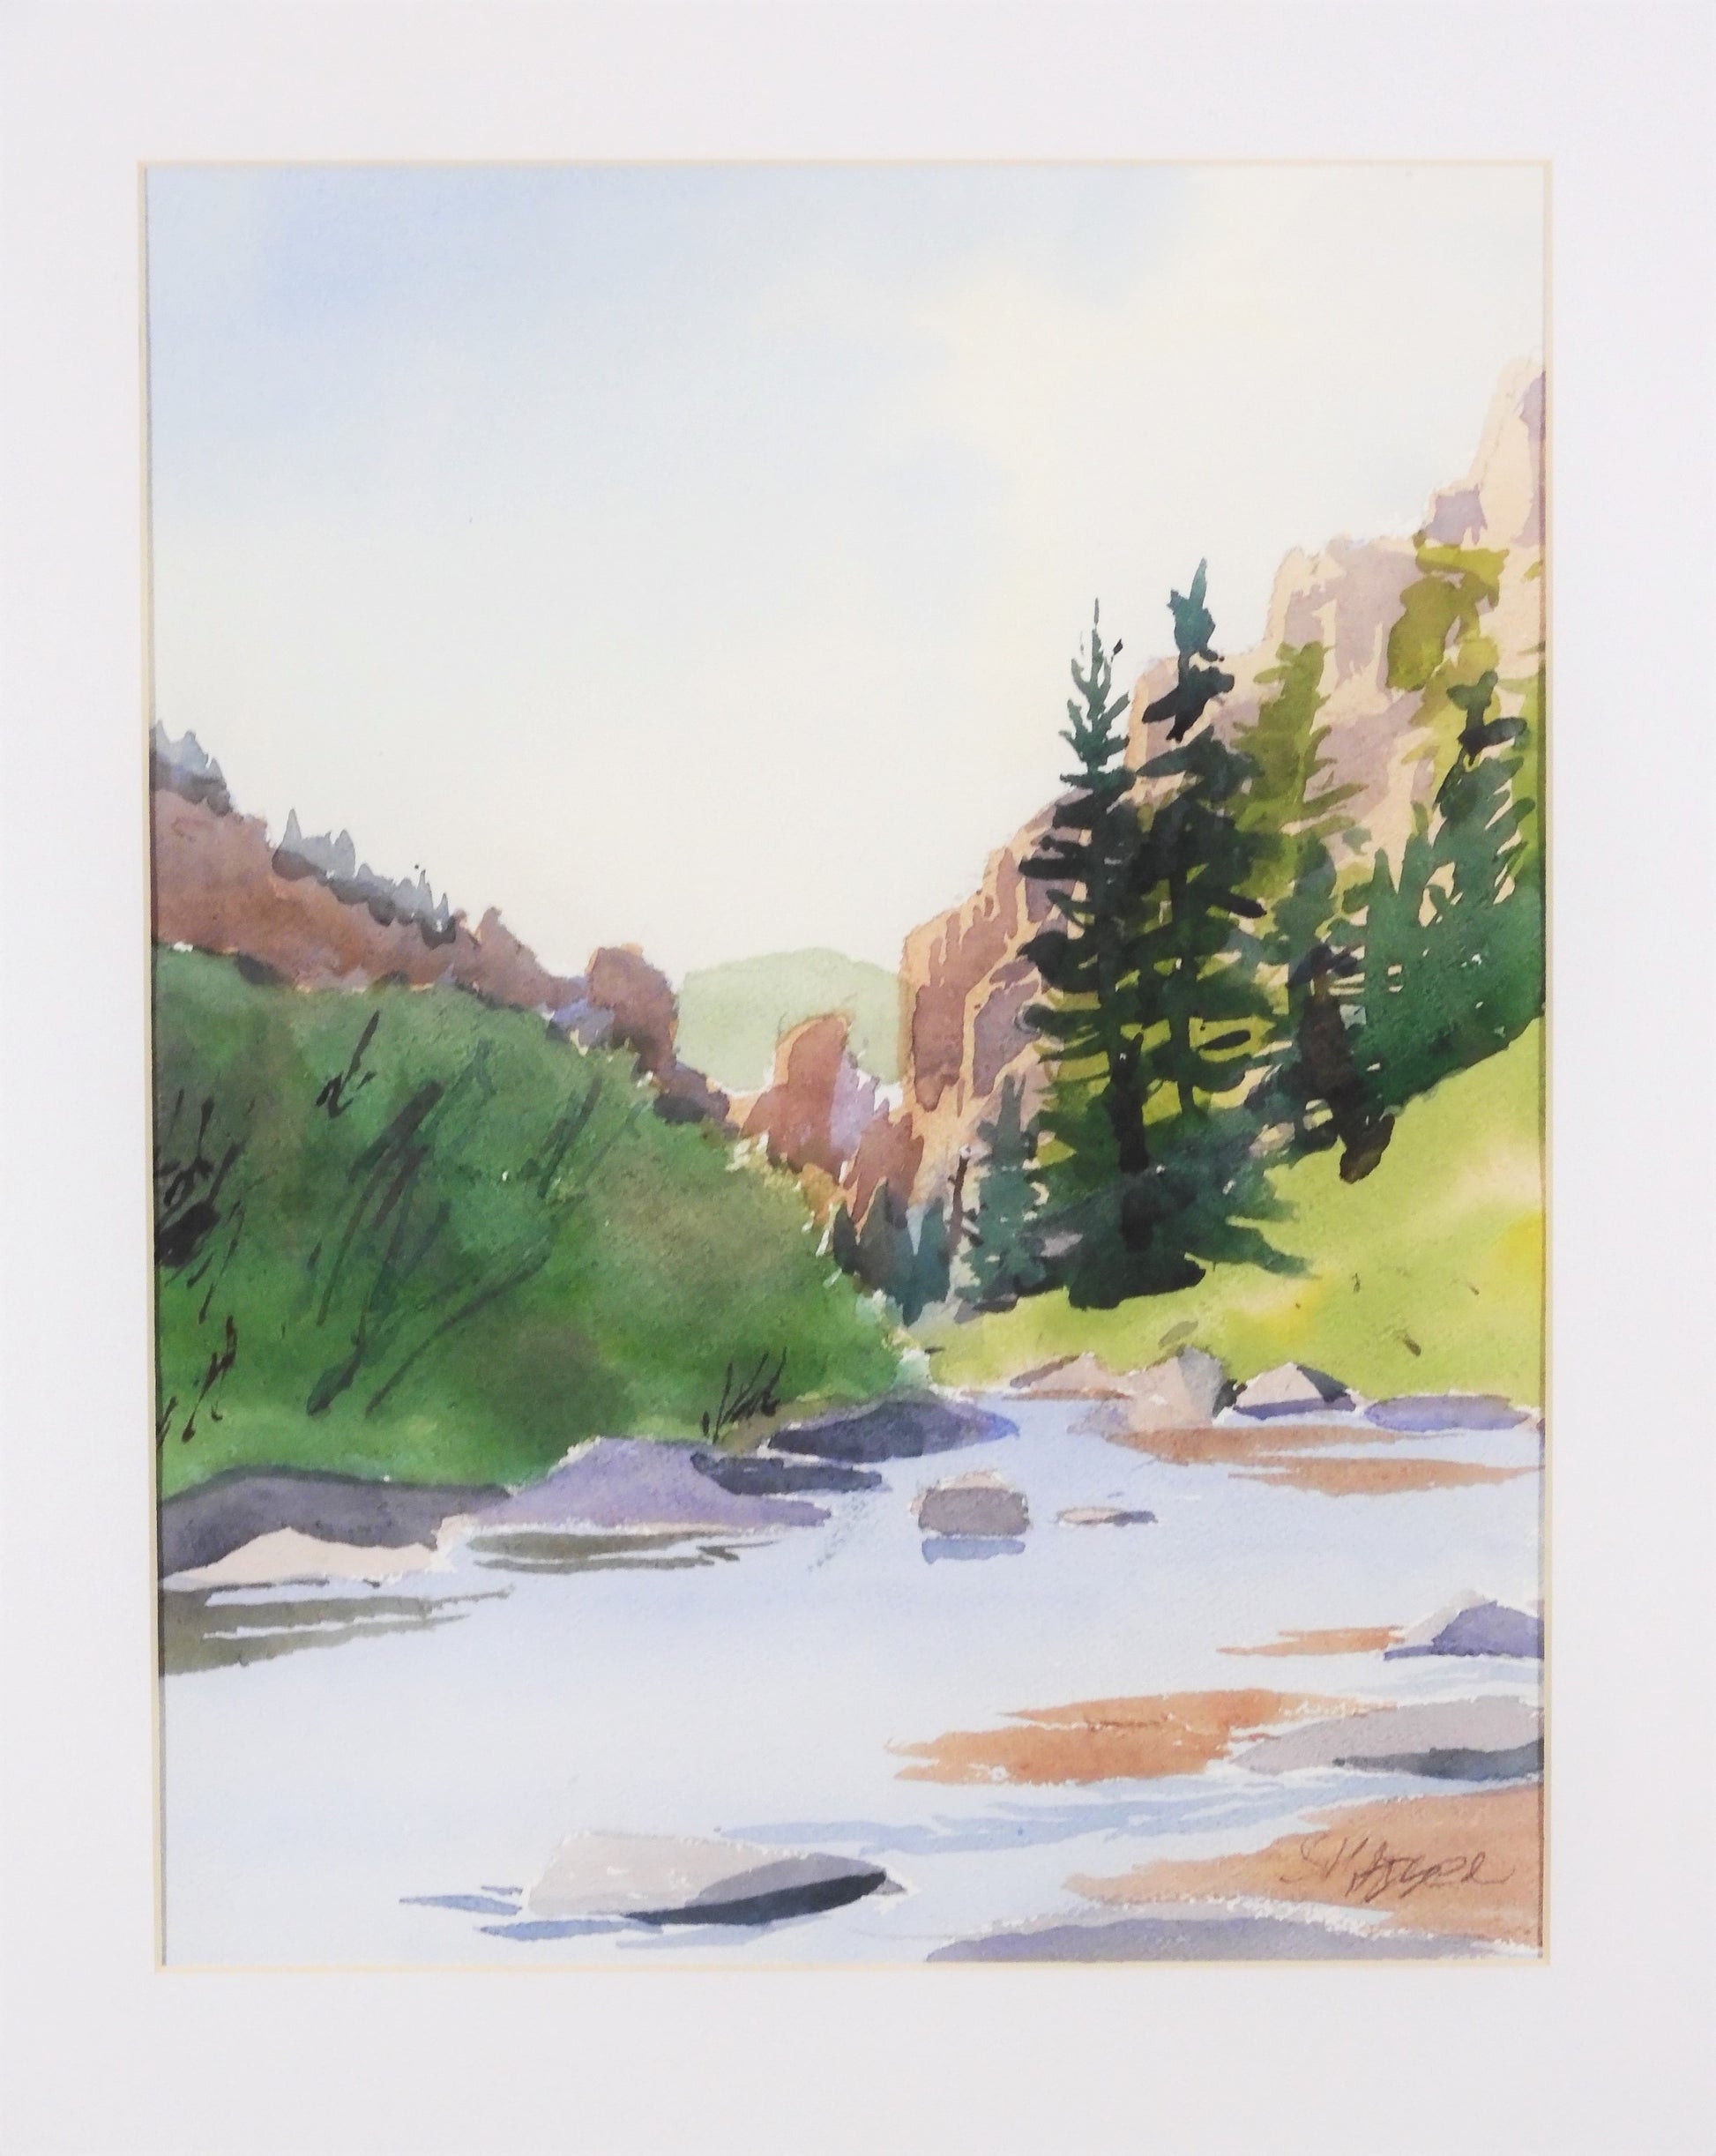 " Bright Day " Original Watercolor Artist: Jon Madsen  Original watercolor painting  River in a canyon  Matted in white matting  10" long x 13" high original watercolor  16" long x 20" high matted  Ready for a frame  Please note item is an original from the artist     From the artist:  I was interested in the paleness of this overcast day